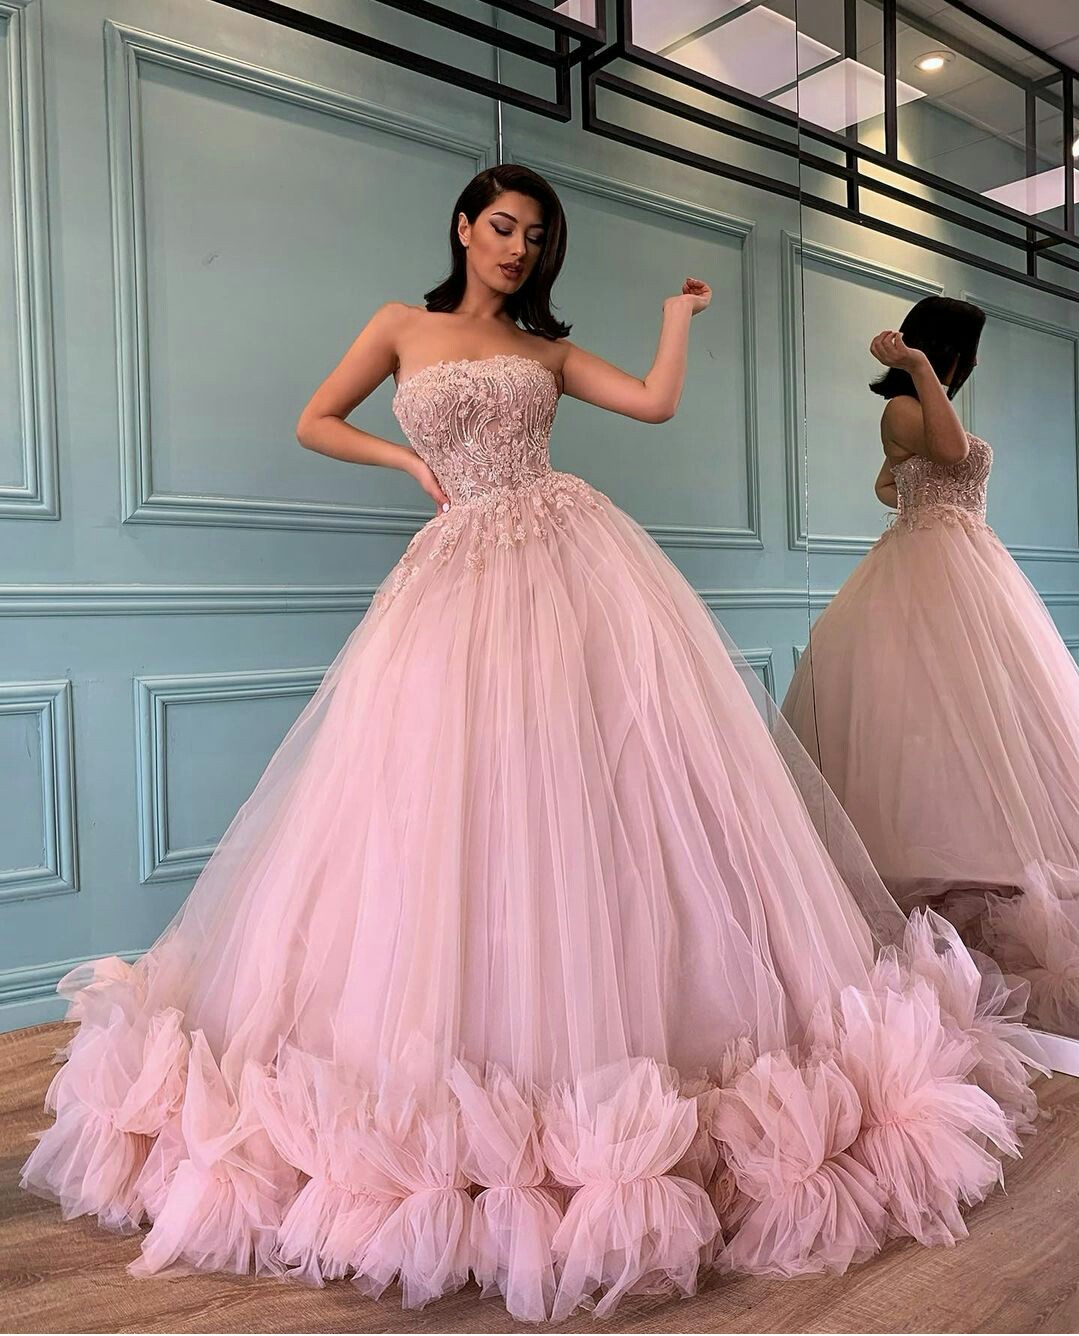 Fancy A Line Prom Dresses Light Pink Strapless Party Dresses Lace Appliques Ruffles Custom Made Evening Dress